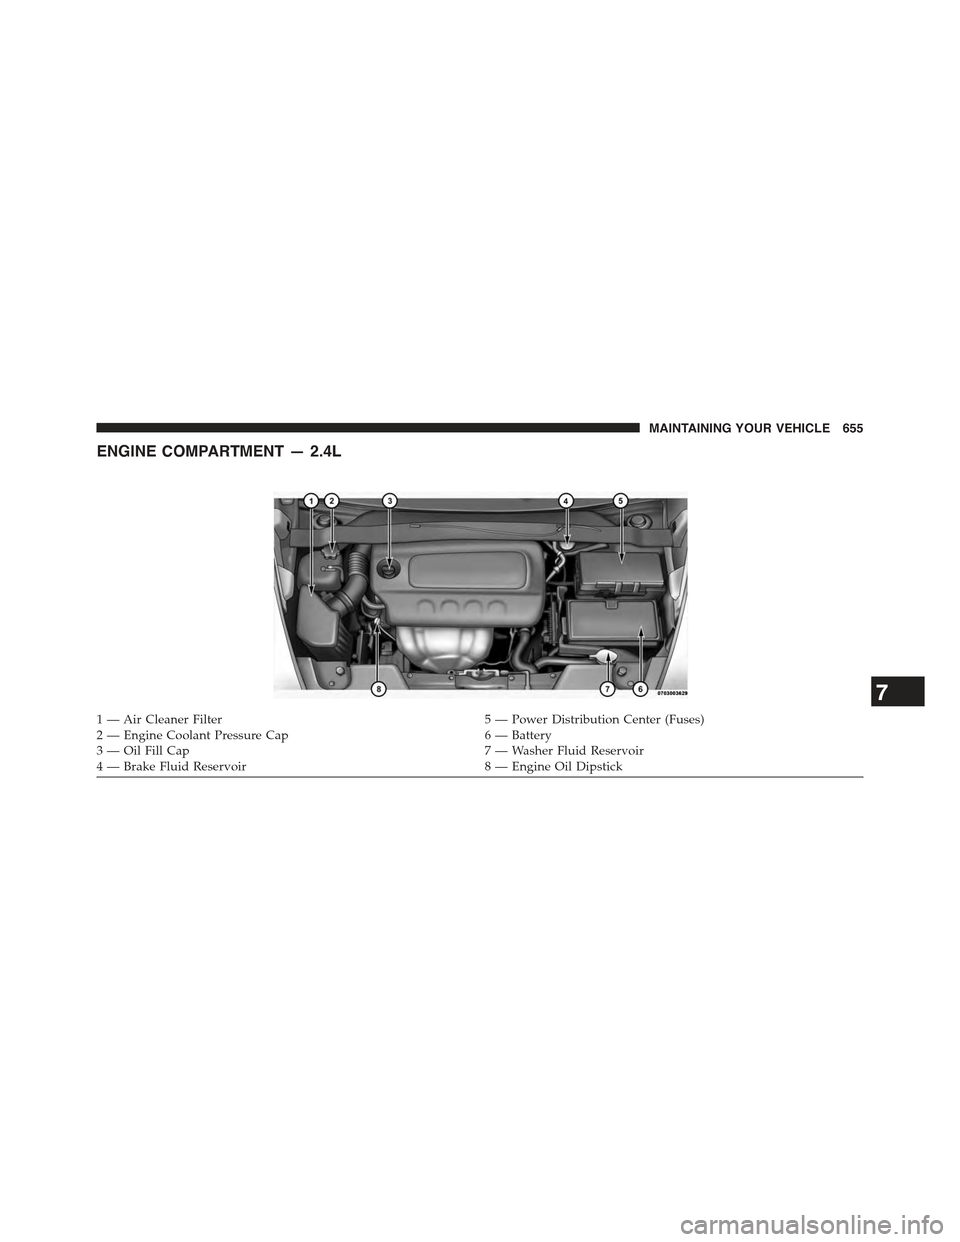 JEEP CHEROKEE 2015 KL / 5.G Owners Manual ENGINE COMPARTMENT — 2.4L
1 — Air Cleaner Filter5 — Power Distribution Center (Fuses)2 — Engine Coolant Pressure Cap6 — Battery3 — Oil Fill Cap7 — Washer Fluid Reservoir4 — Brake Fluid